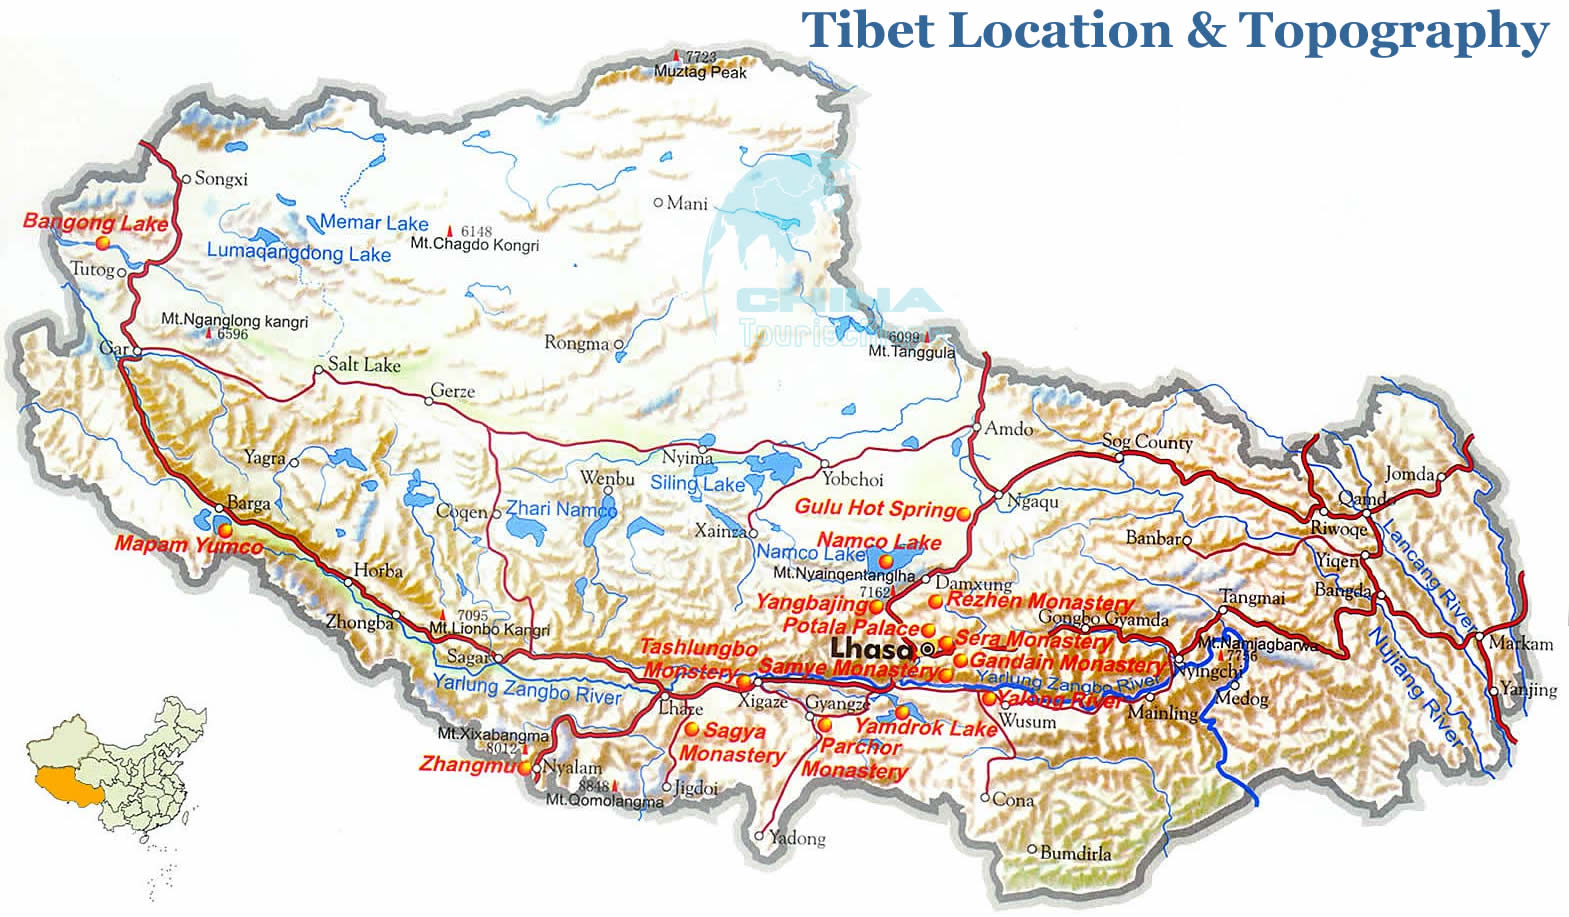 Tibet-Location-and-Topography